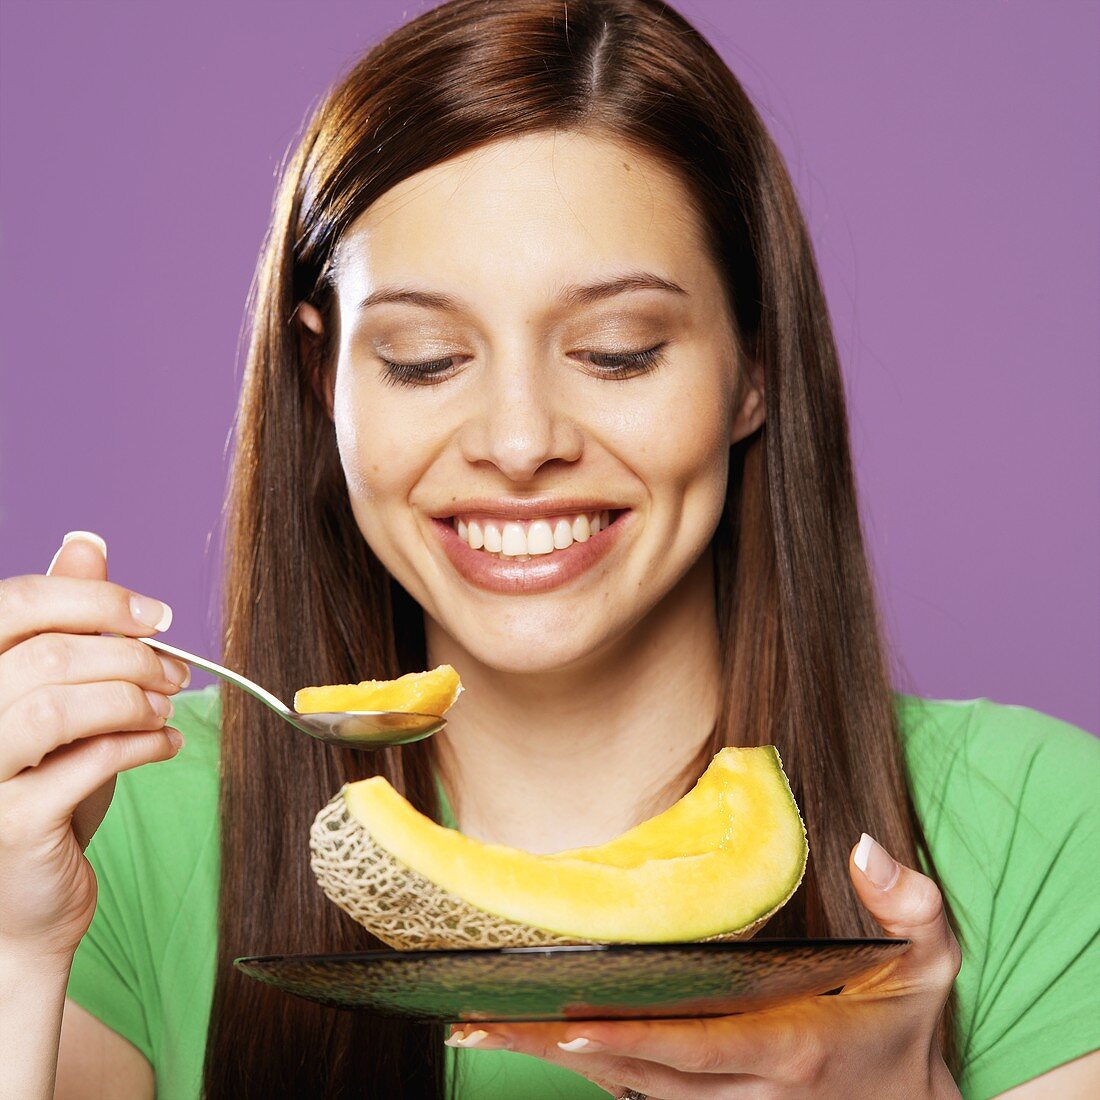 A Smiling Young Woman Taking a Spoonful of Cantaloupe